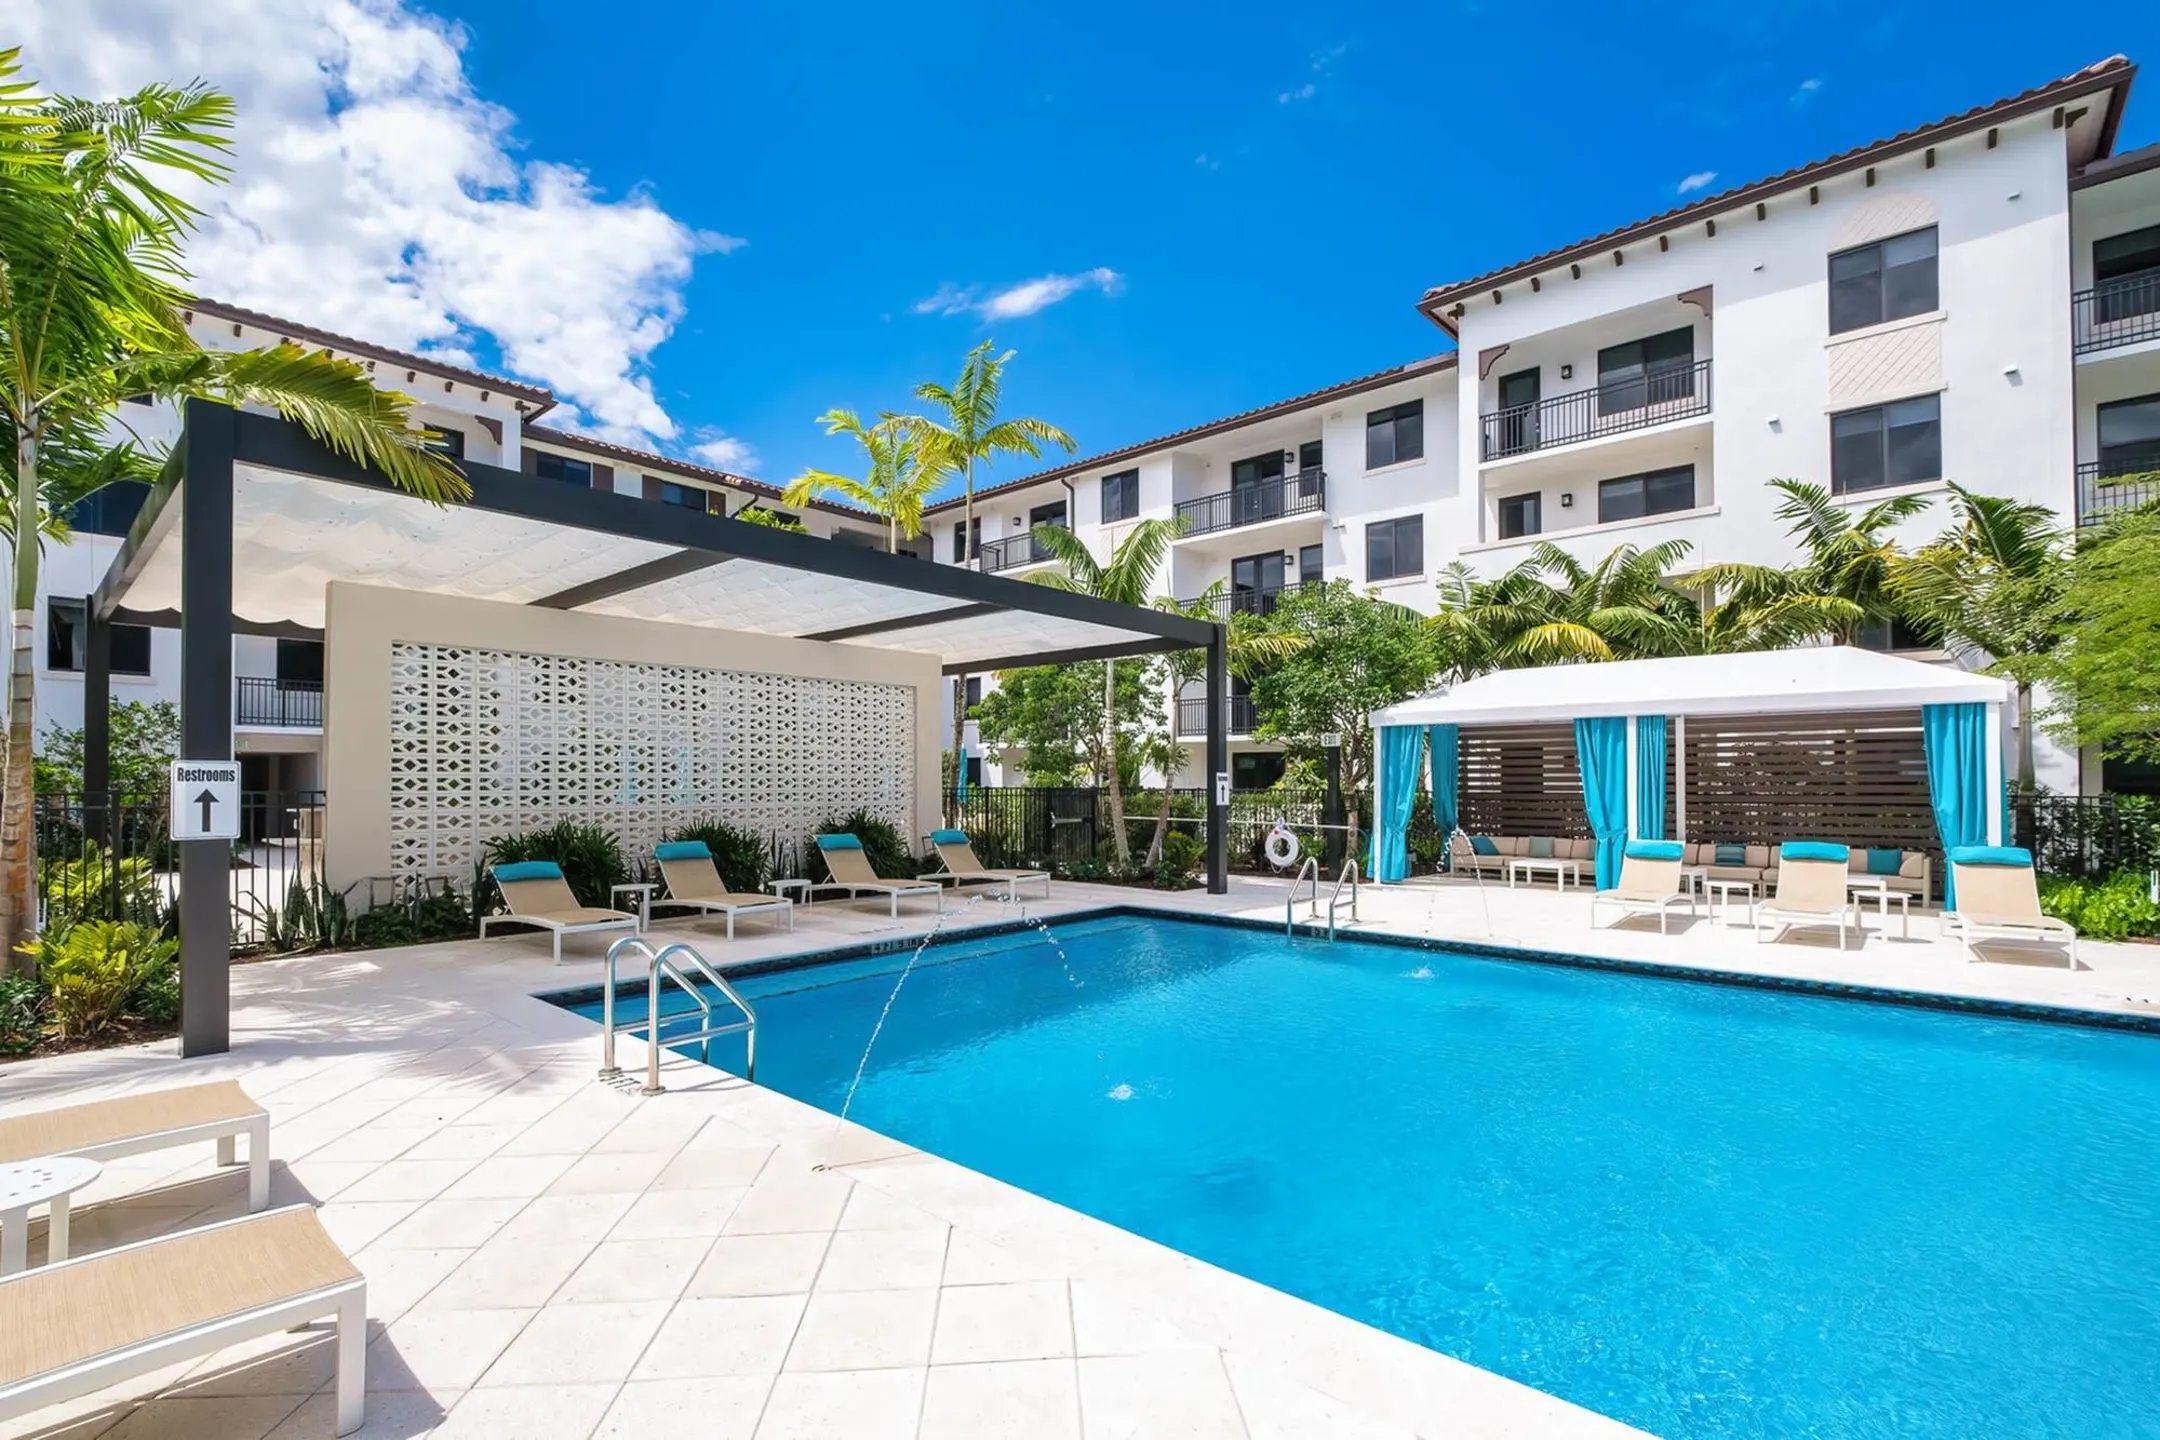 Pool - The Residences at Monterra Commons - 55+ Active Adult Community - Pembroke Pines, FL